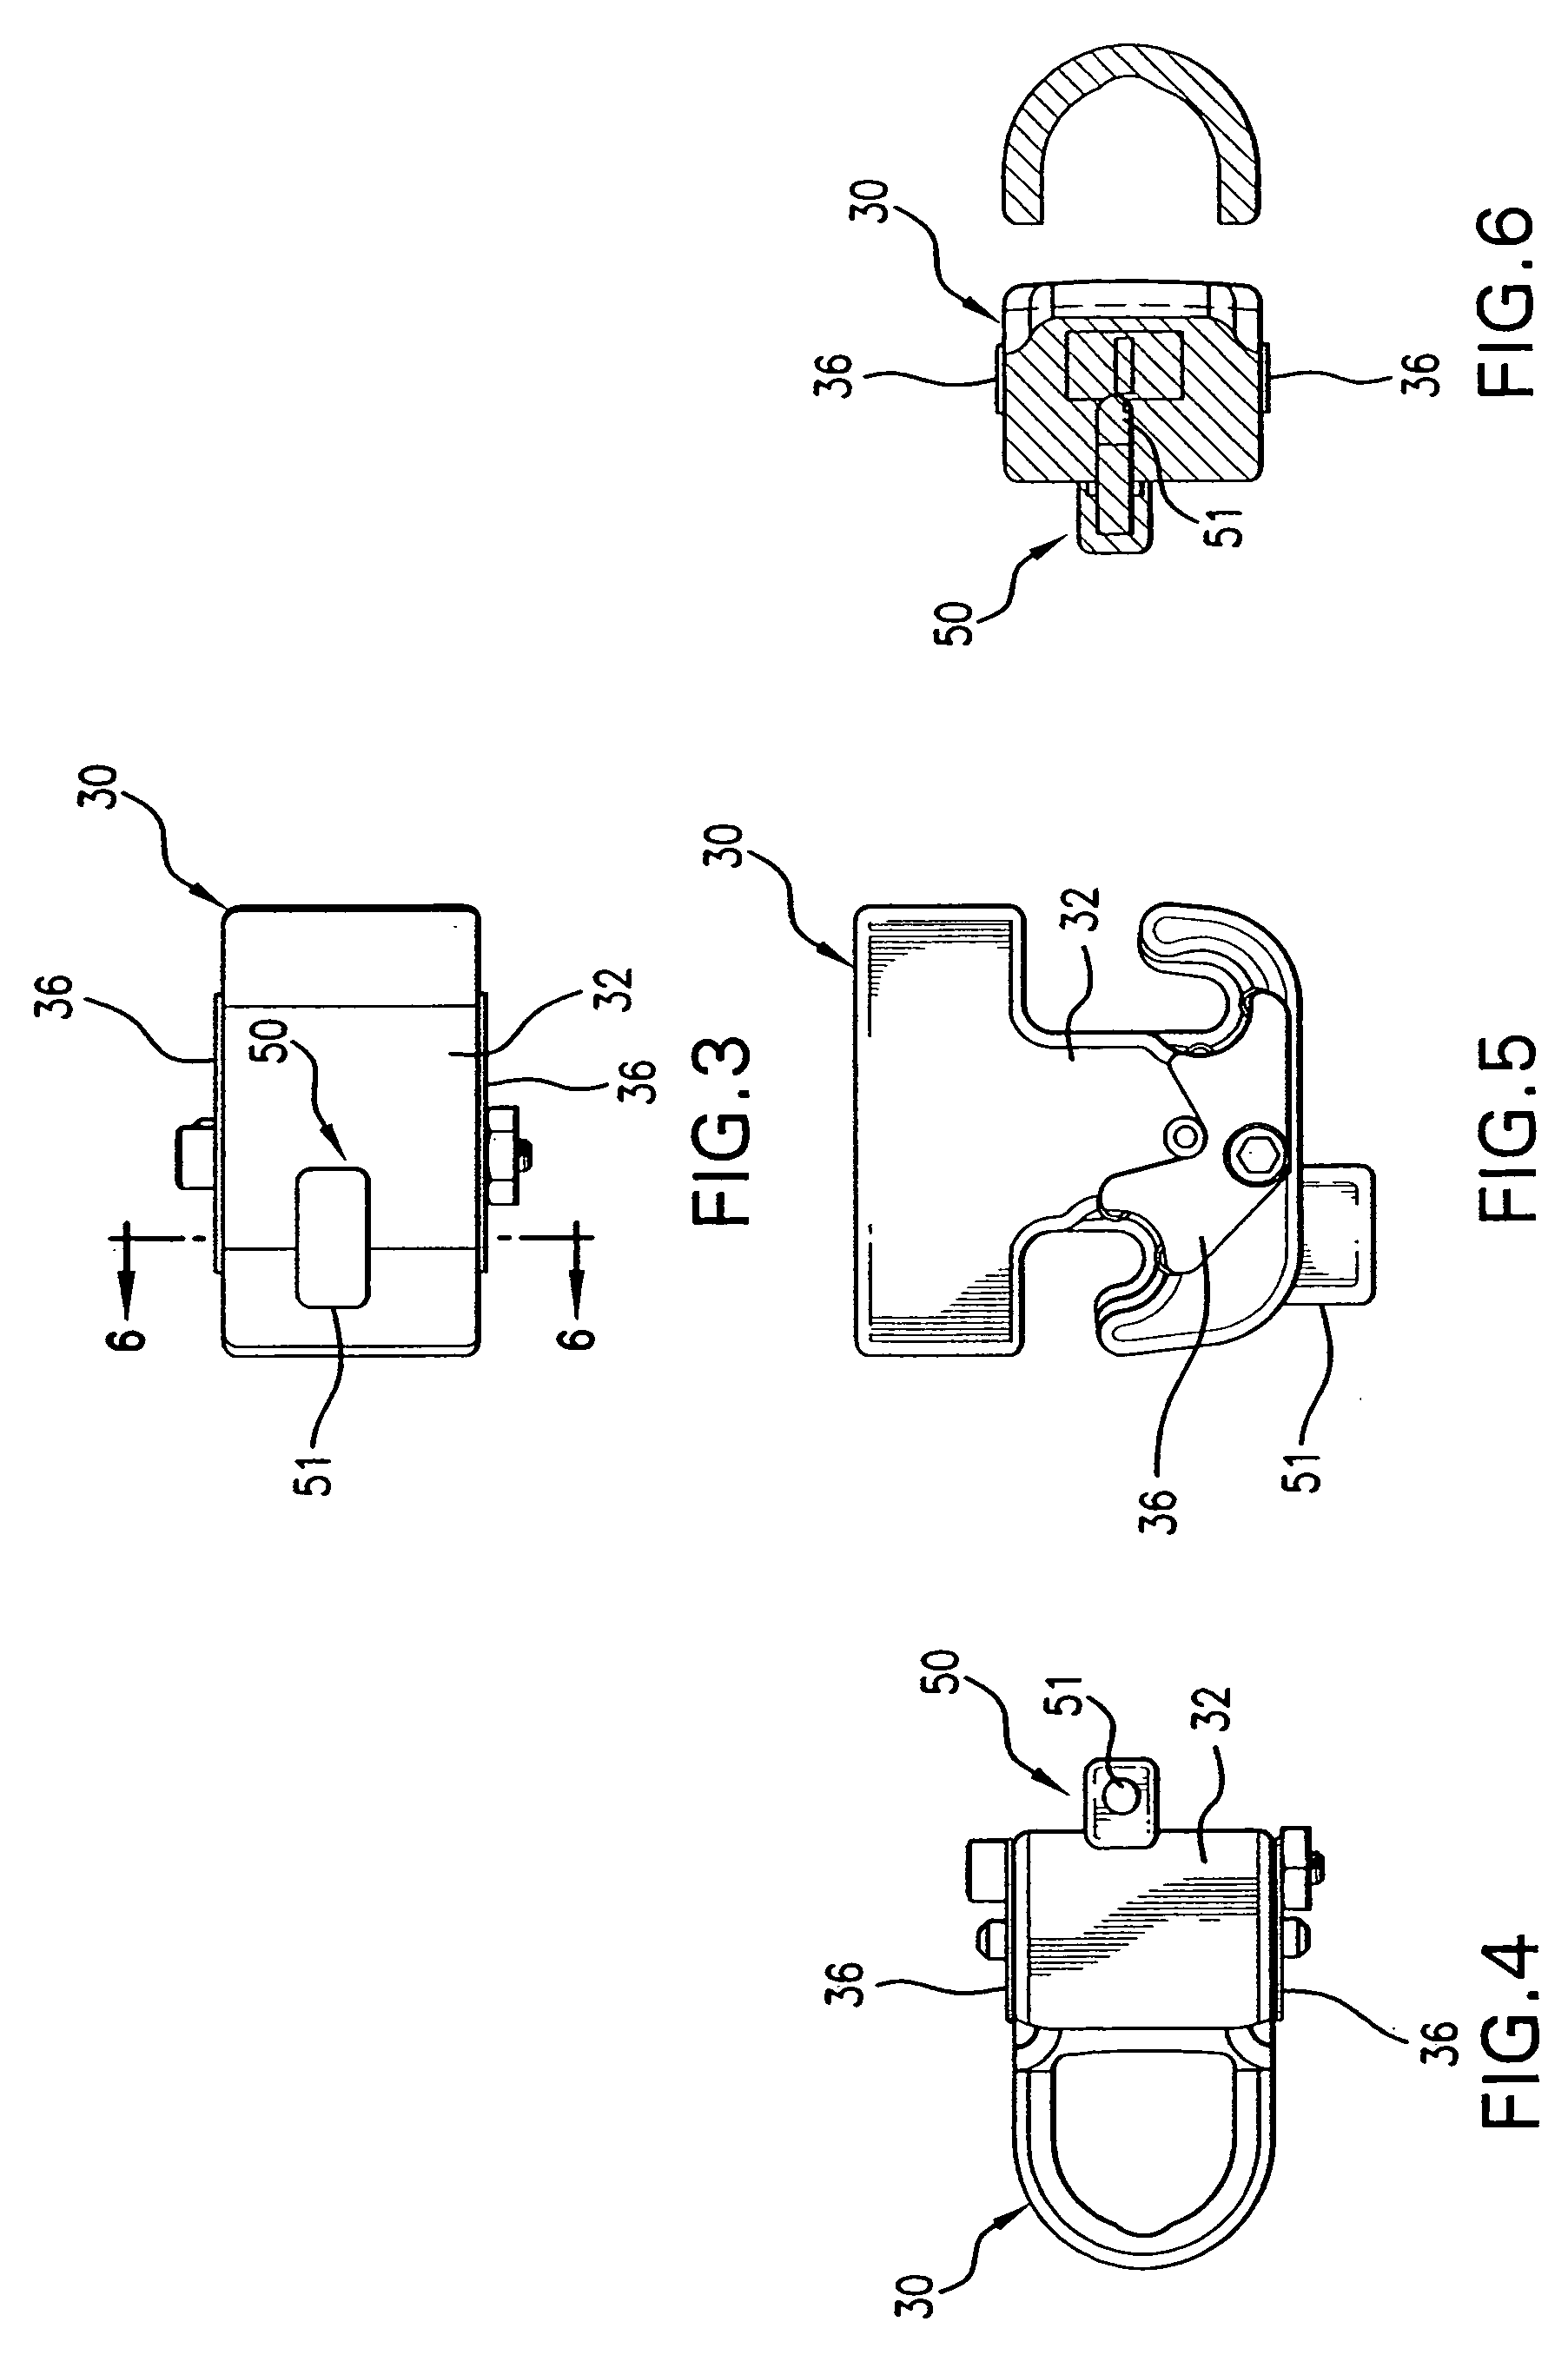 Apparatus and method for identifying a position of a bowstring